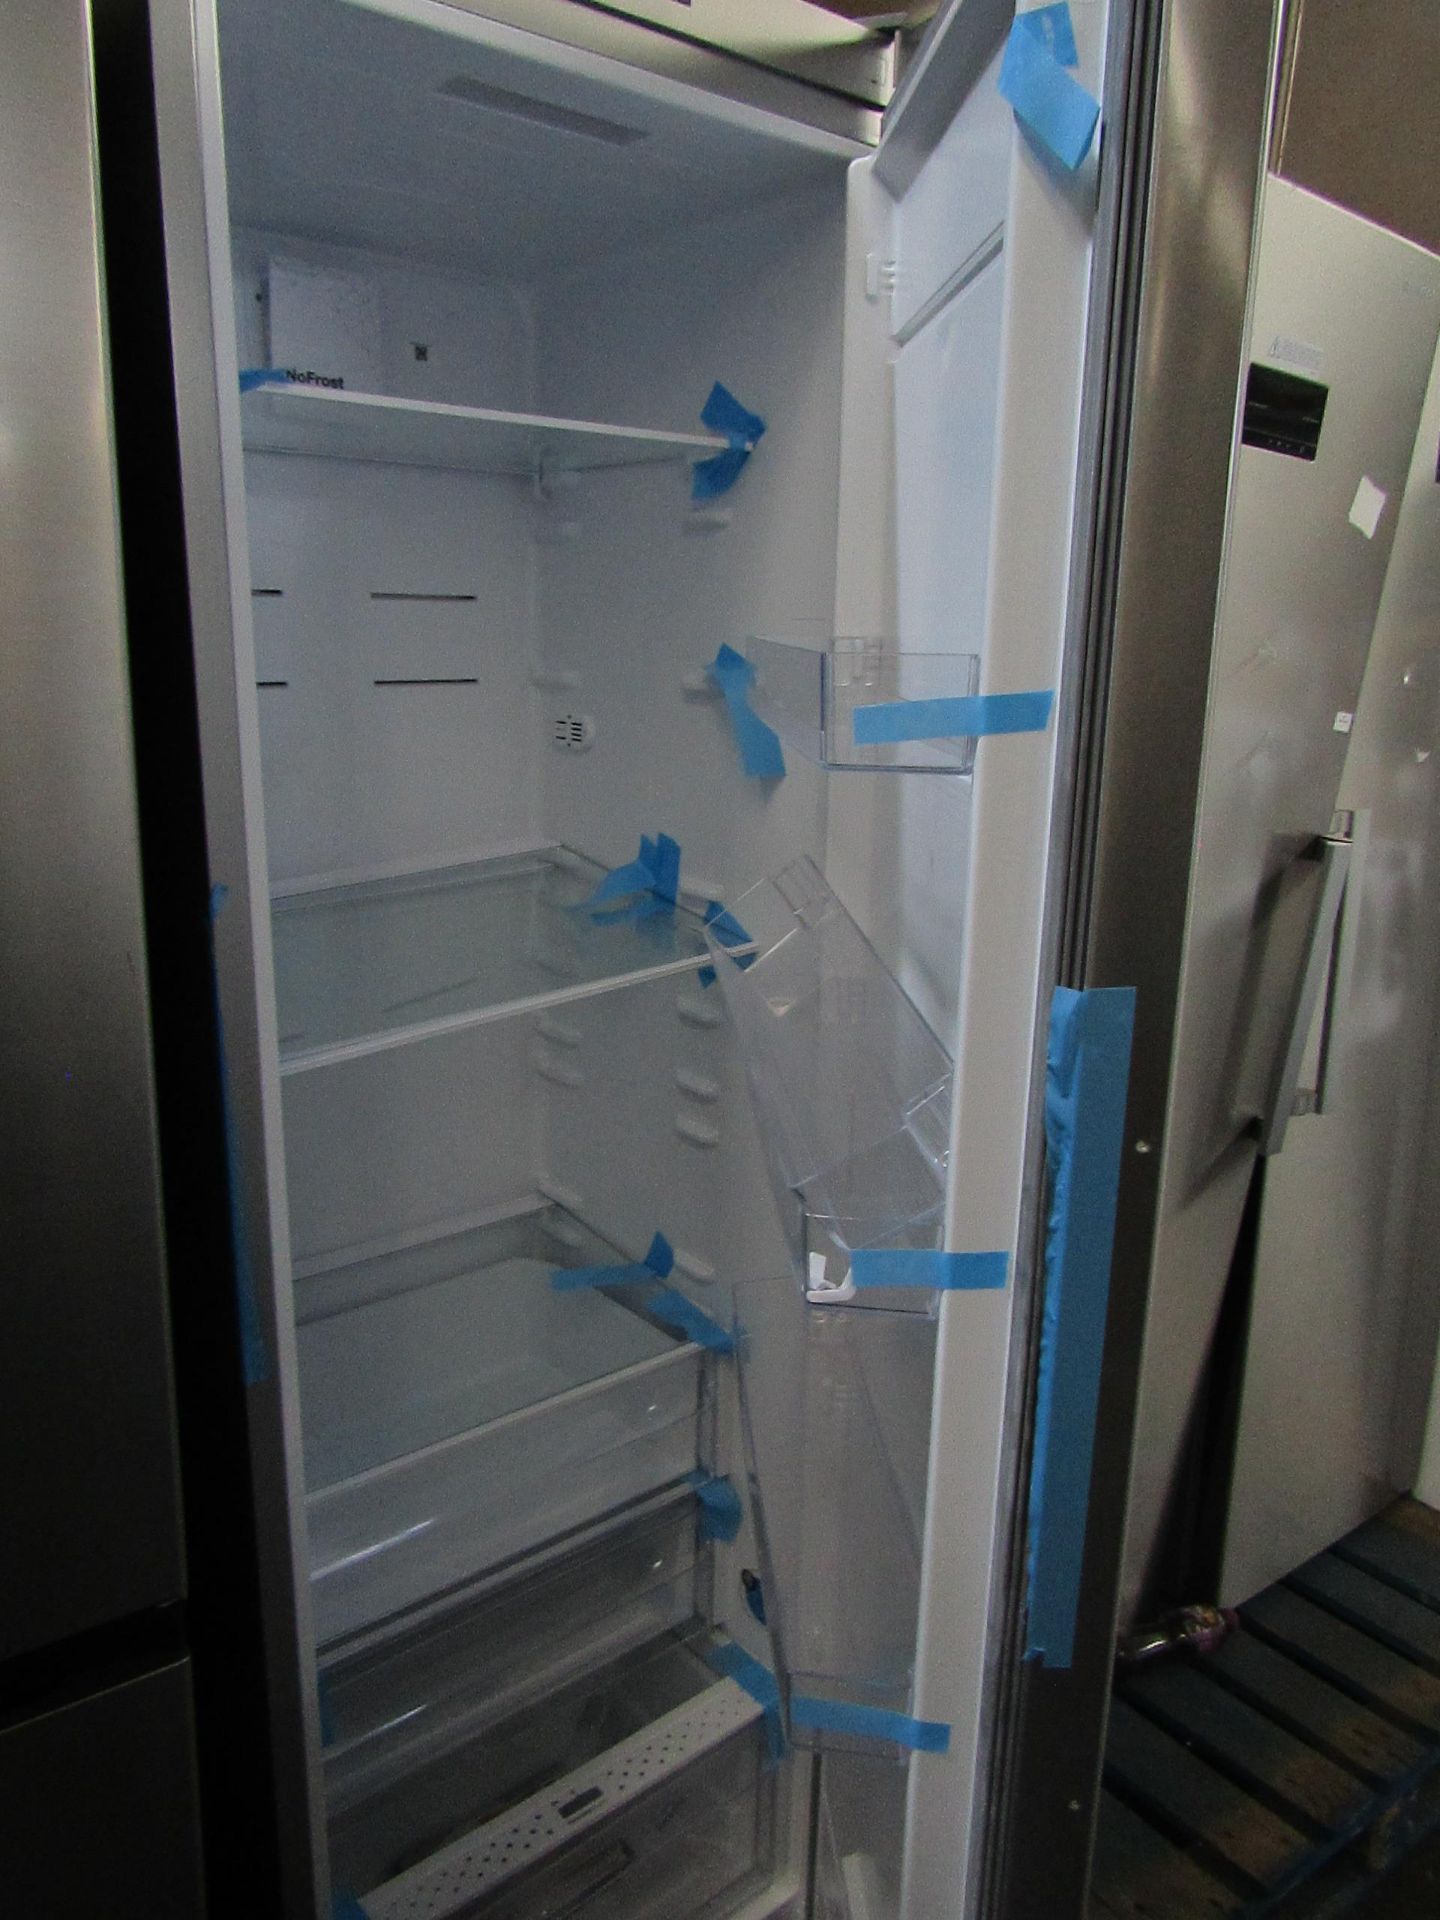 Smeg - Stainless Steel Tall Freestanding Fridge - Dents On Front, Not Getting Cold. - Image 2 of 2